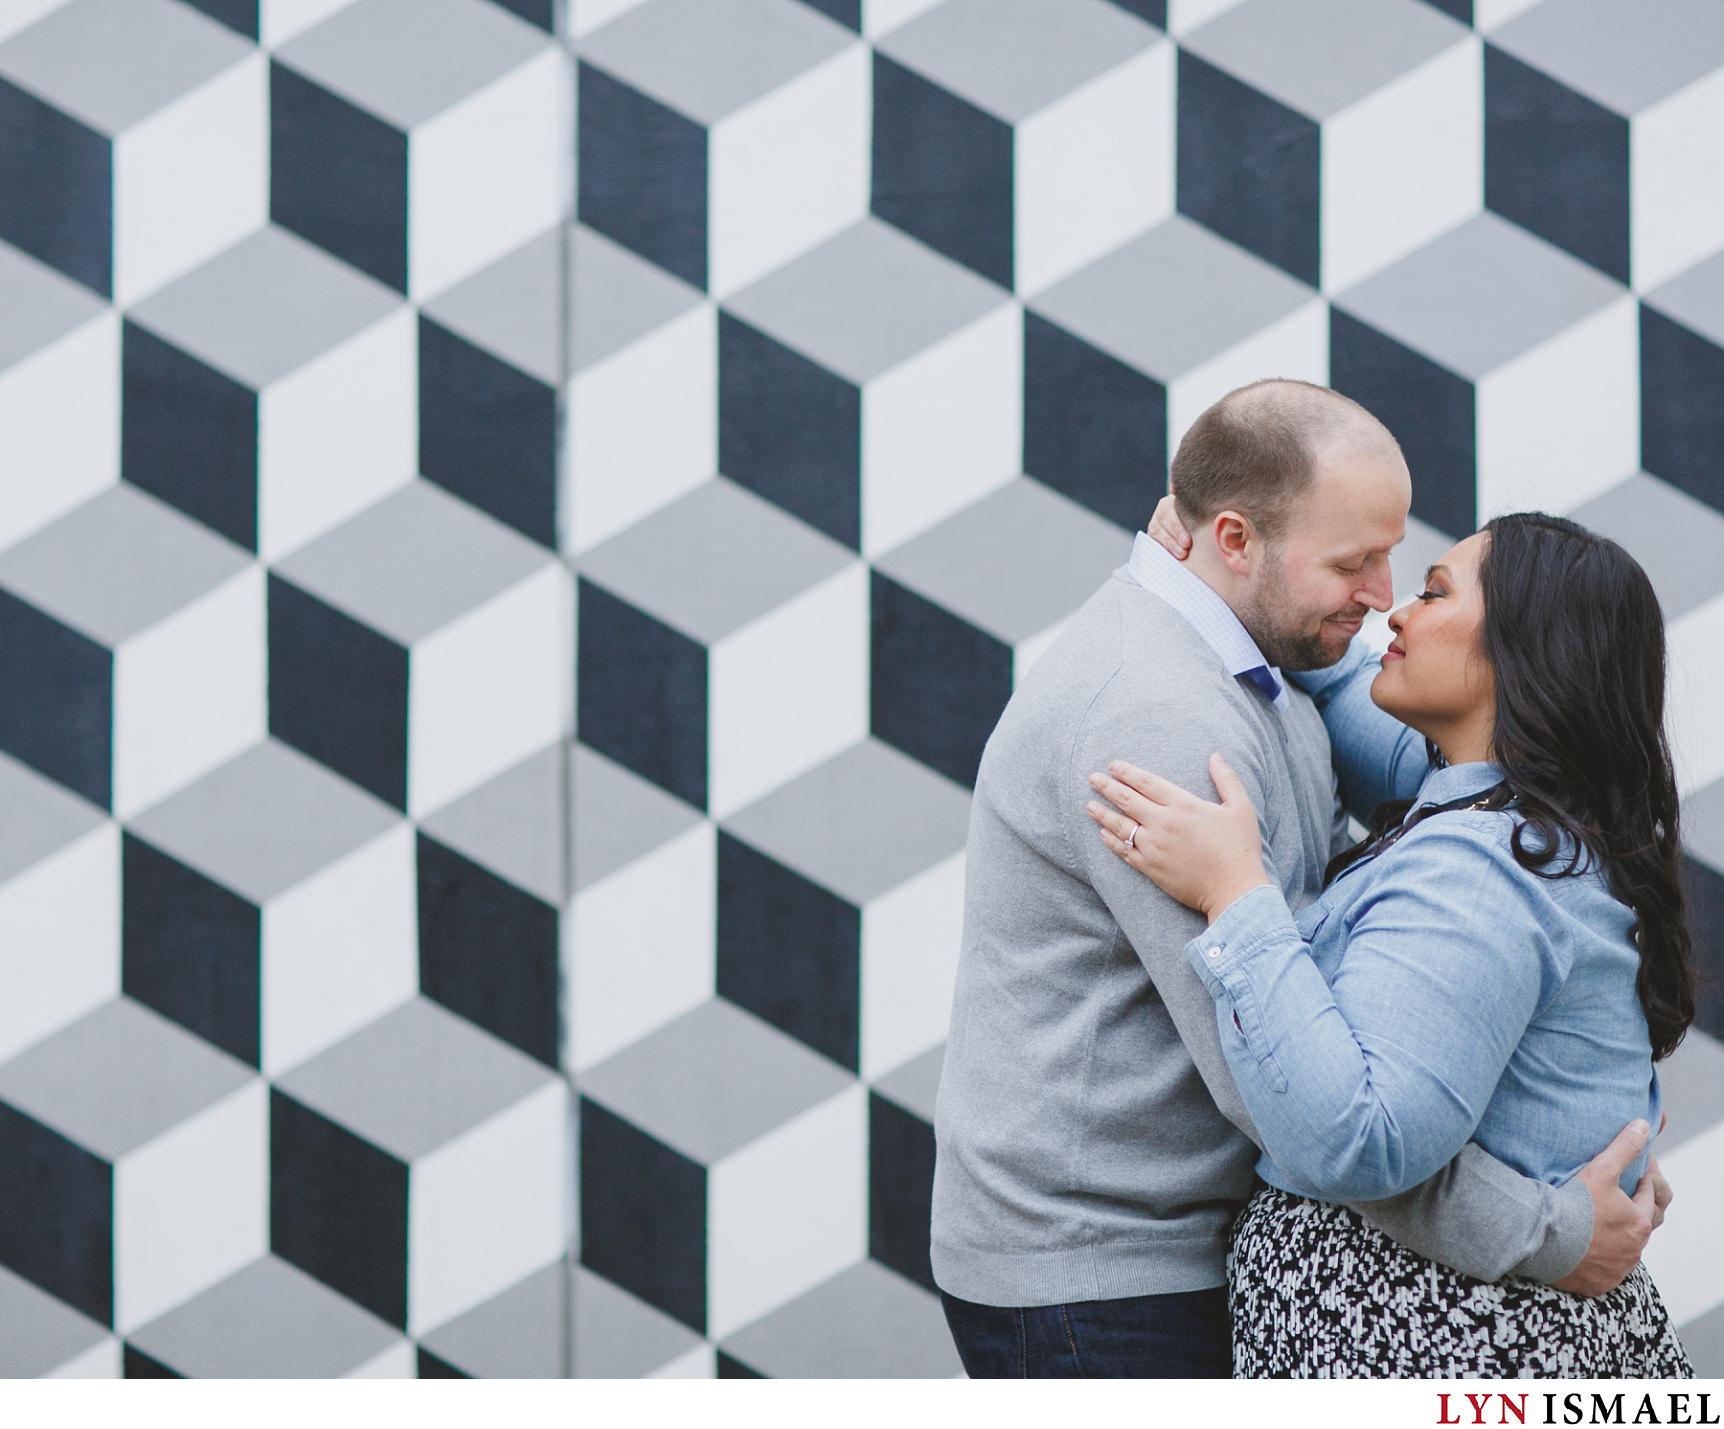 A graphic backdrop for an engagement session at Mississauga Civic Centre